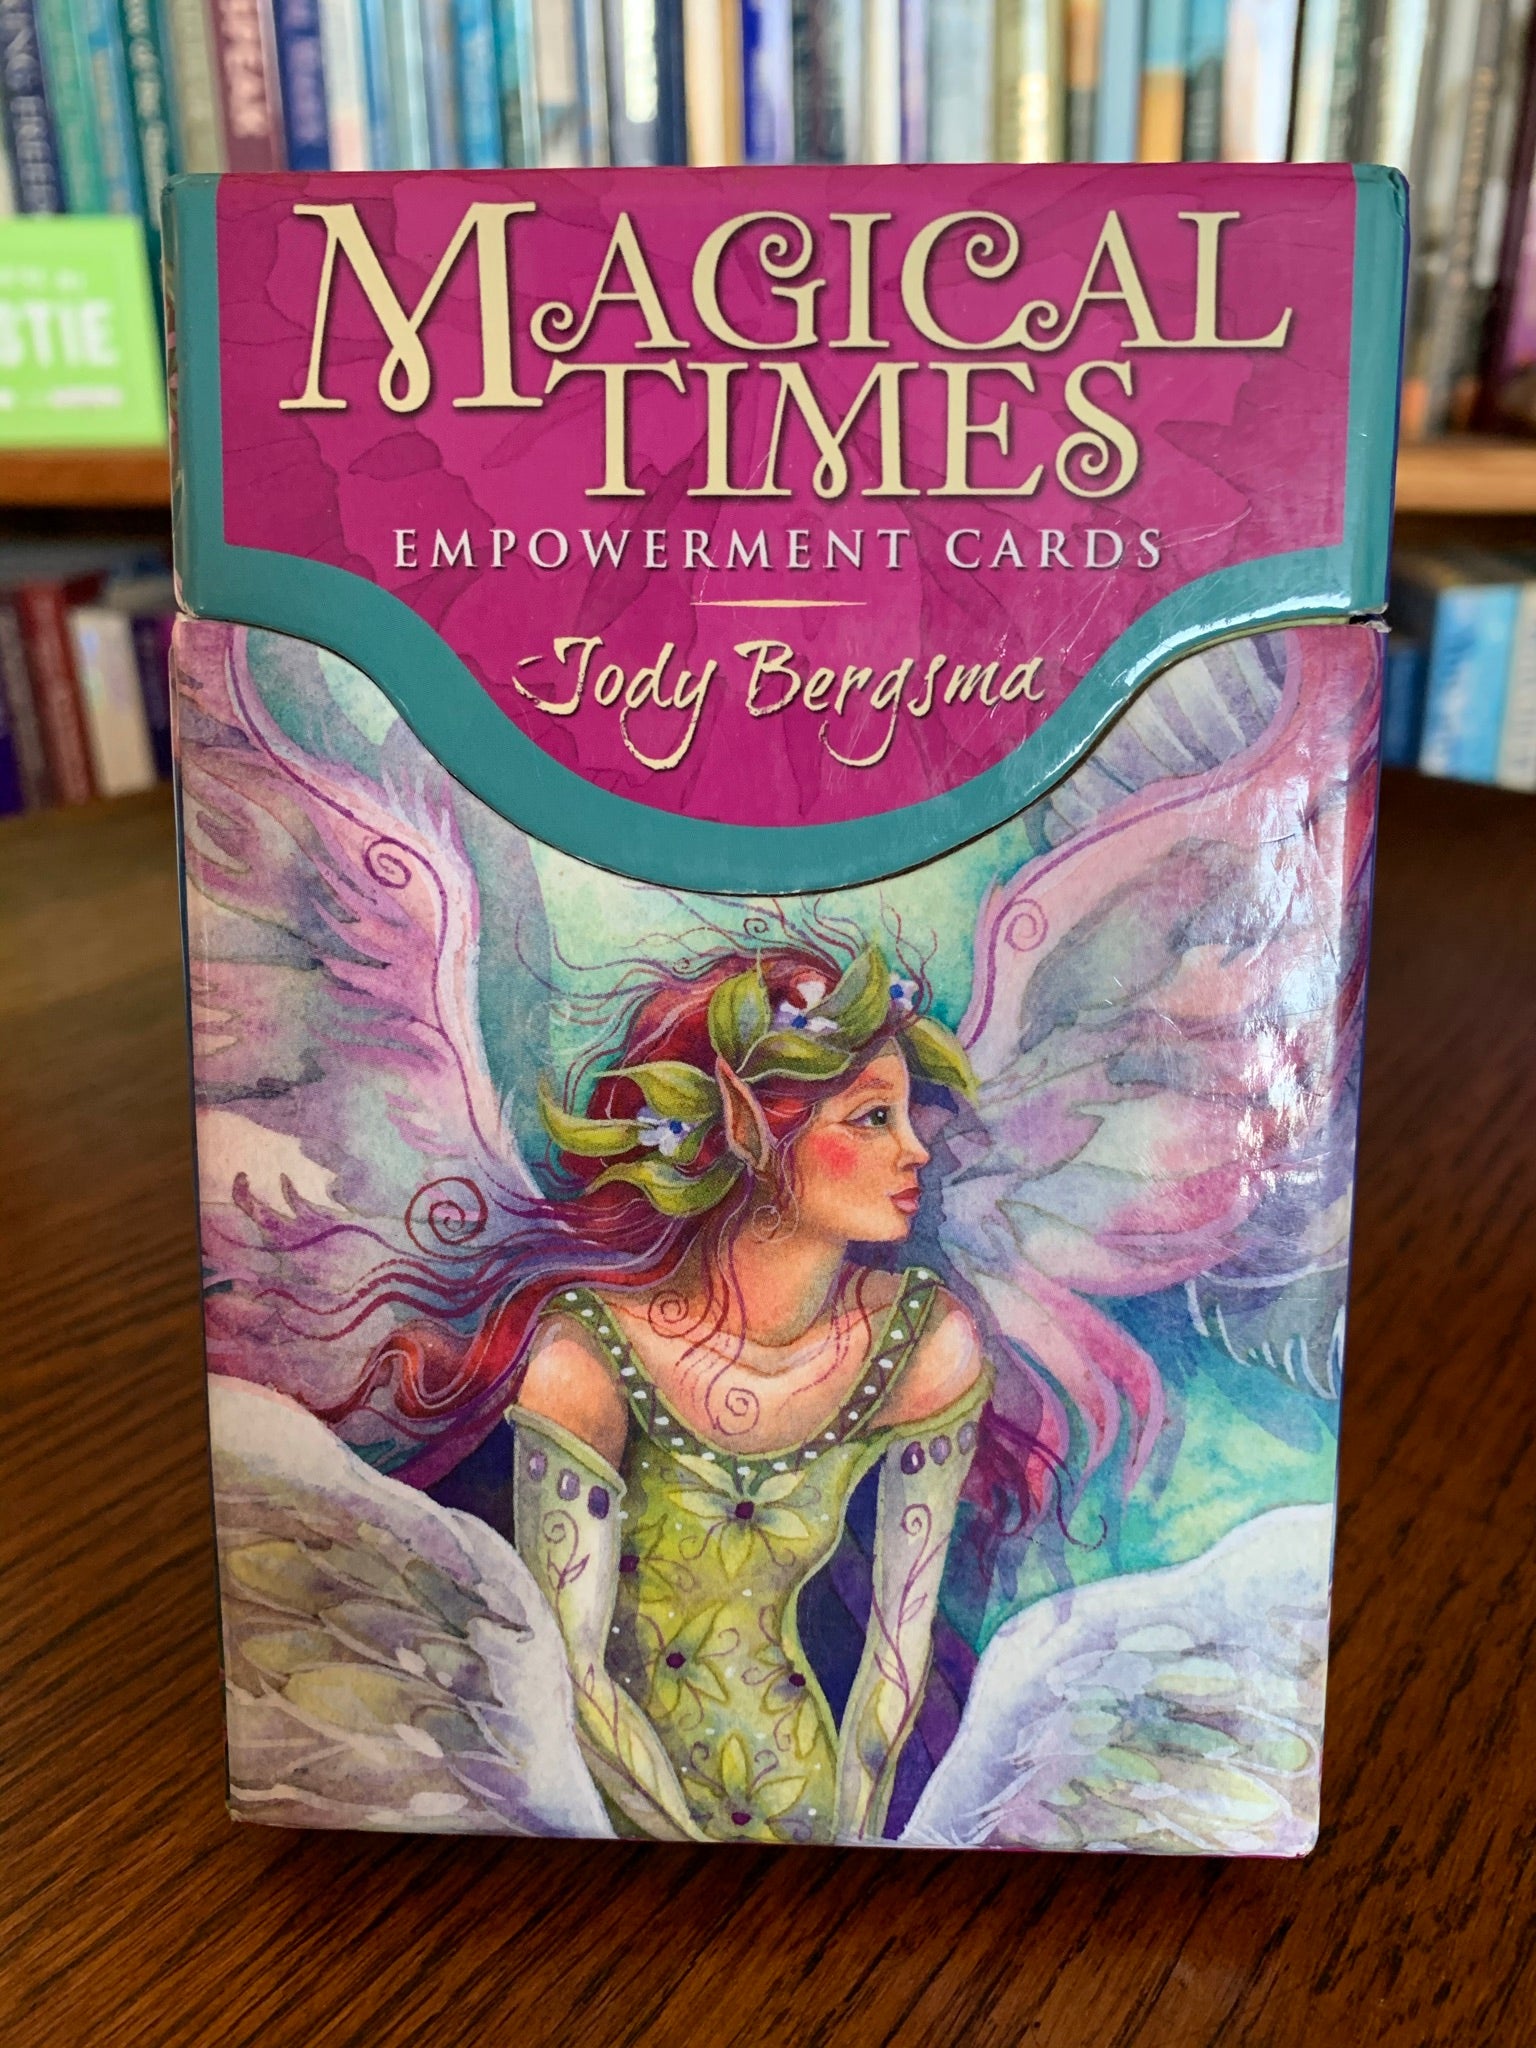 Photo of the box front. Magical Times Empowerment Cards consist of 44 beautifully illustrated cards by the artist, Jody Bergsma, a small, paper guide booklet and a very nice box for storage. You can use these cards as a regular oracle deck or for simply choosing a message with an affirmation for your day, week or month. I love this deck and like to follow up every reading with one of these wonderful cards.  Price is $19.95.